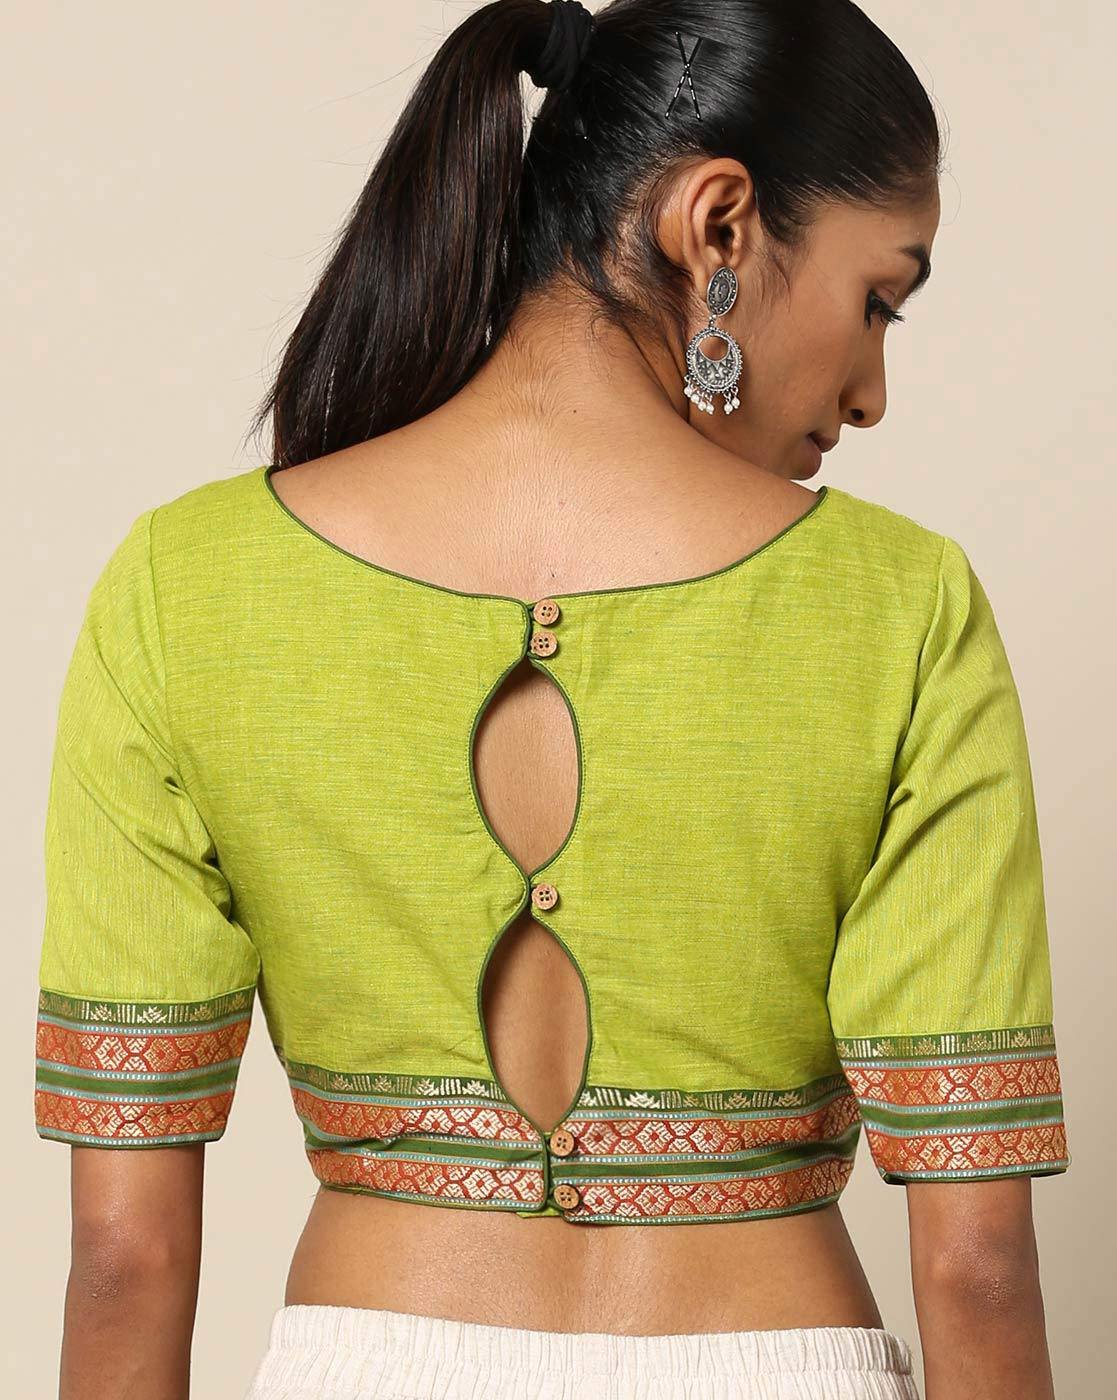 Blouse Back Neck Net Designs Photos Blouse Designs Best Stunning Latest Saree Blouse Neck Designs Blouses Discover The Latest Best Selling Shop Women S Shirts High Quality Blouses,Creative Visual Merchandising Window Display Design